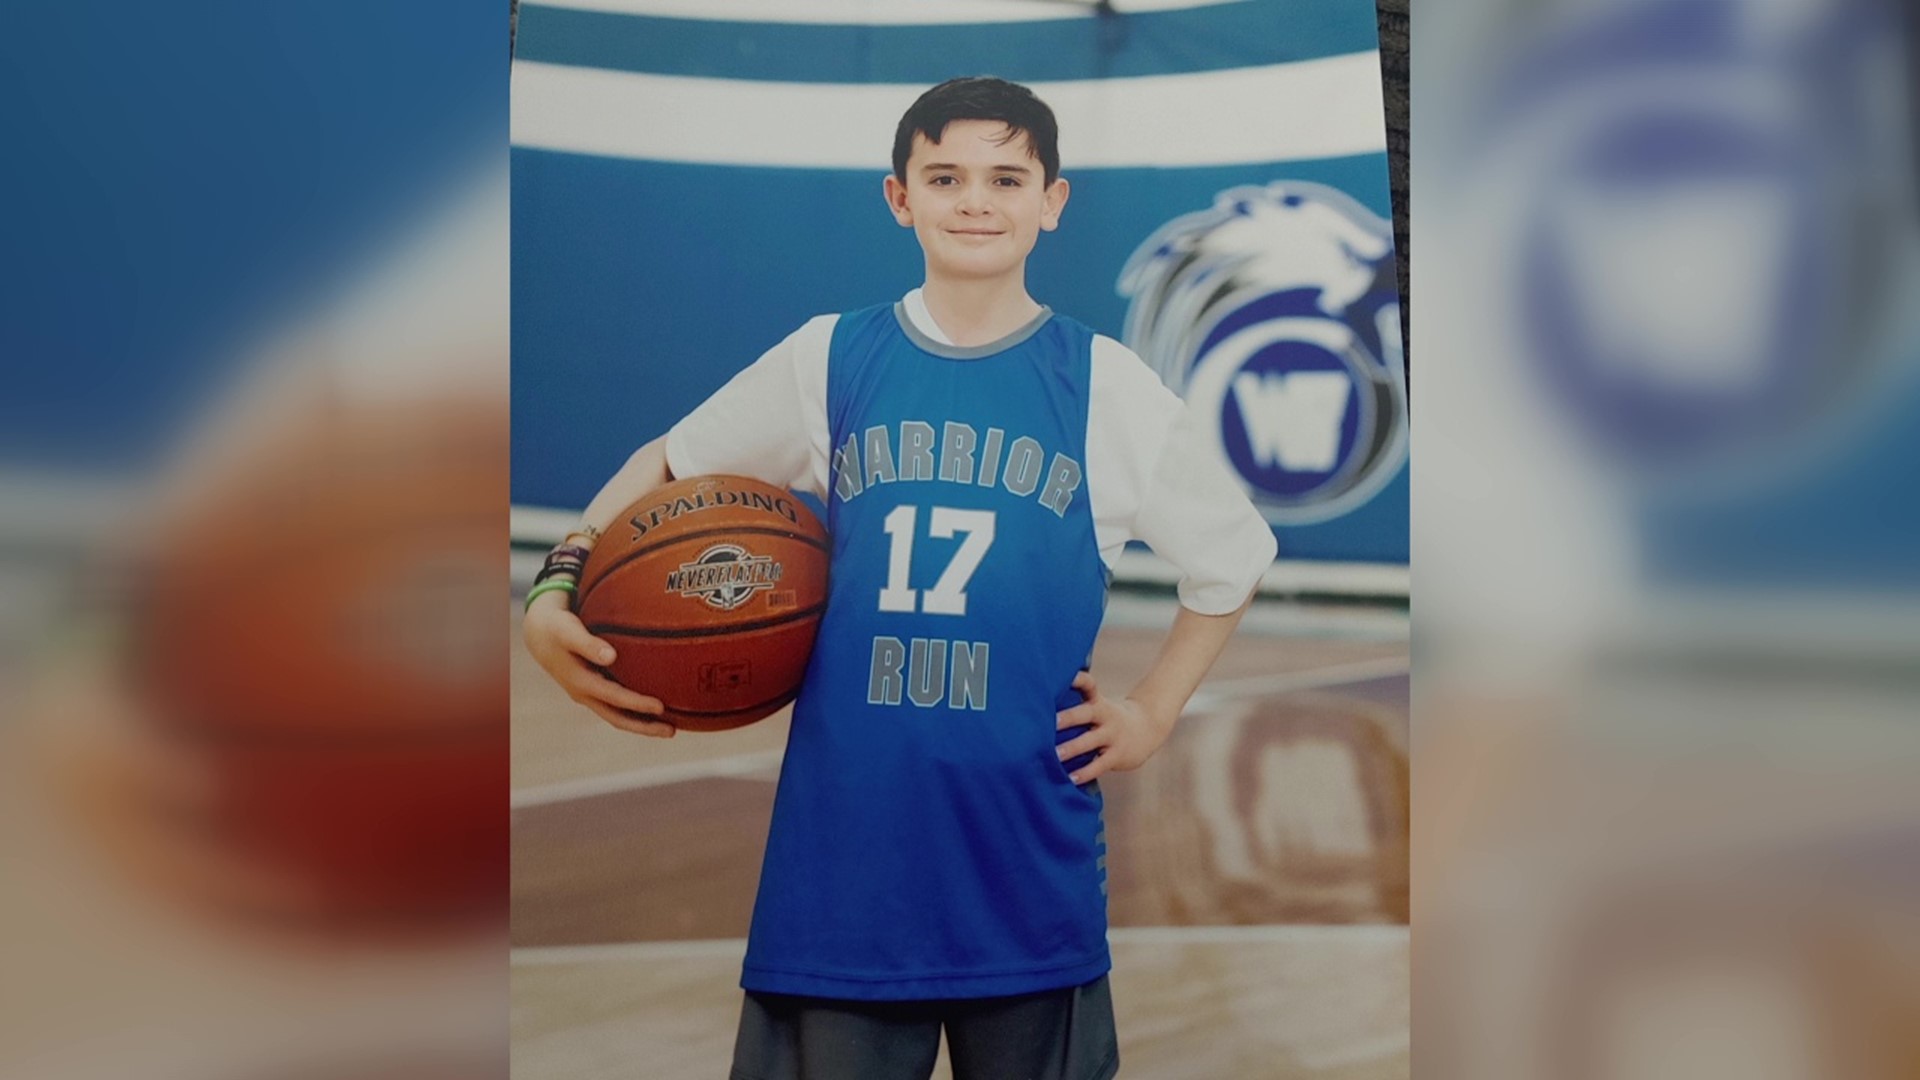 People in central Pennsylvania are remembering a young boy who died one year ago. Hunter Reynolds, age 11, of Watsontown, was killed in a crash in Perry County.